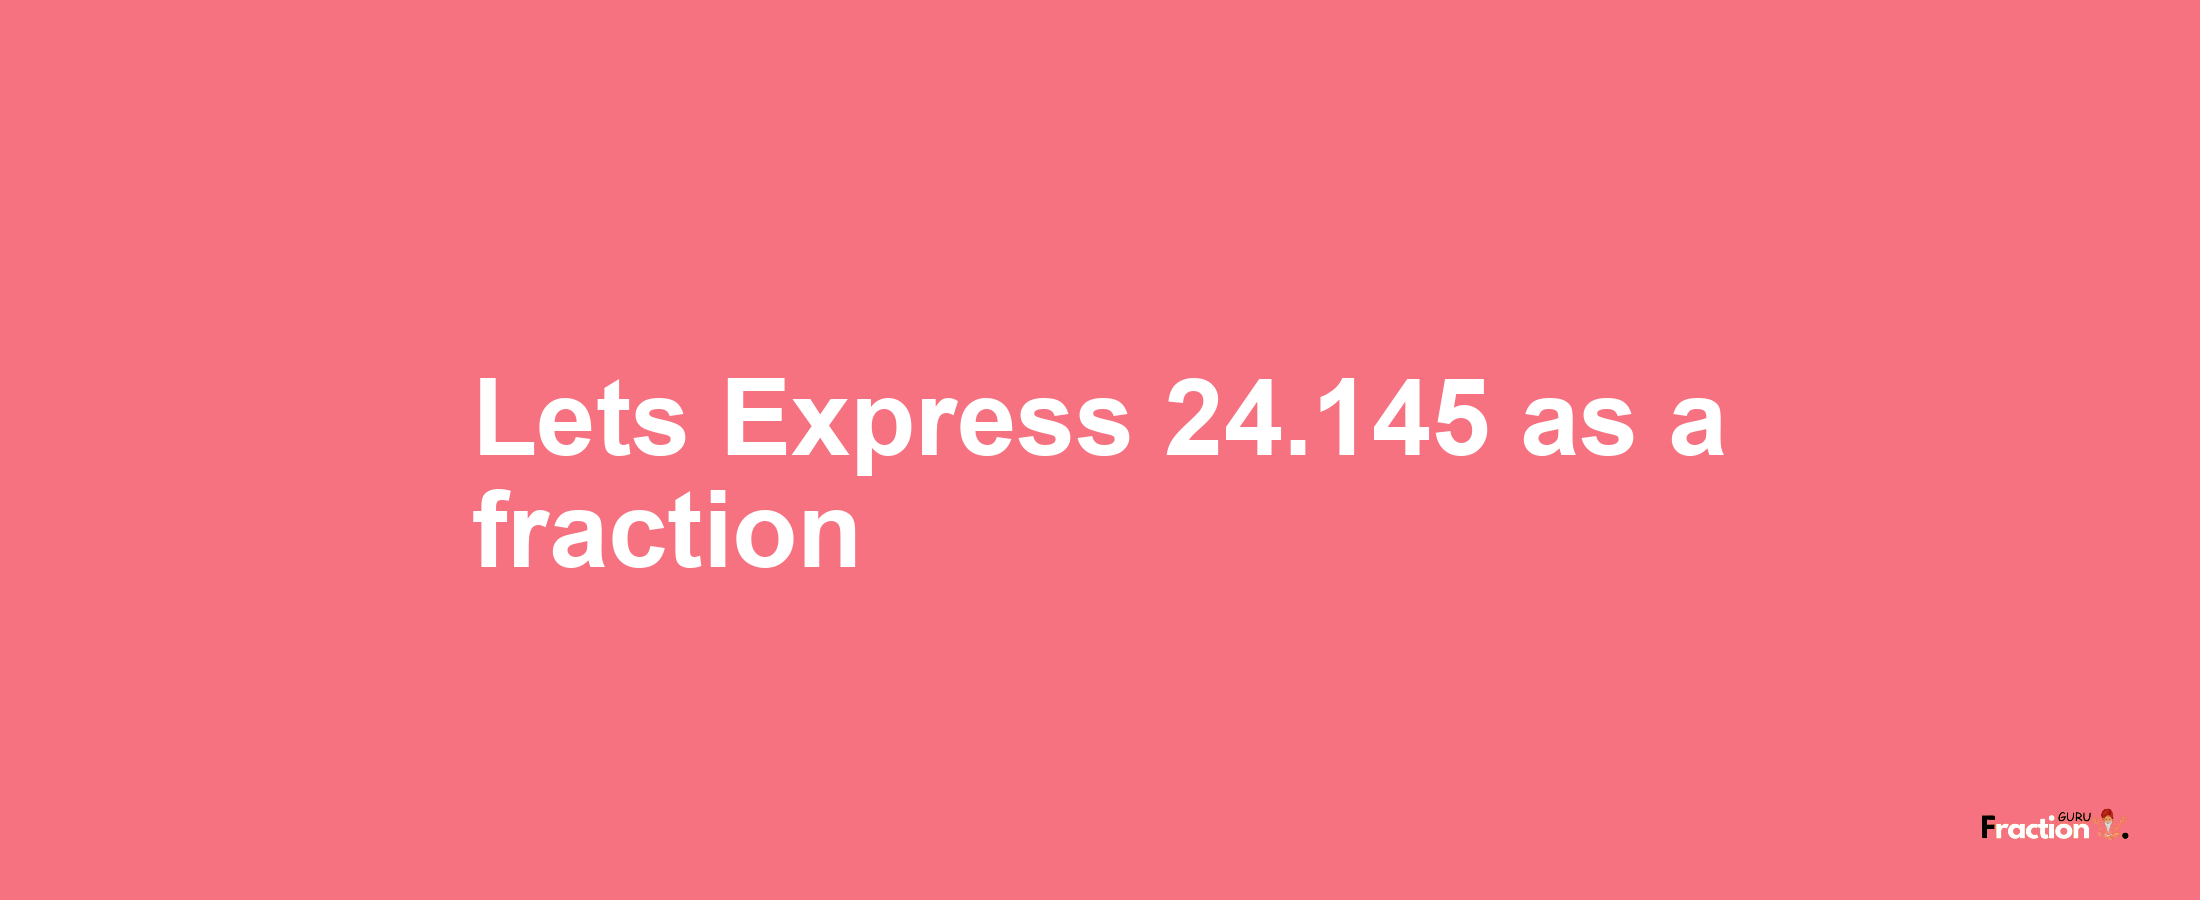 Lets Express 24.145 as afraction